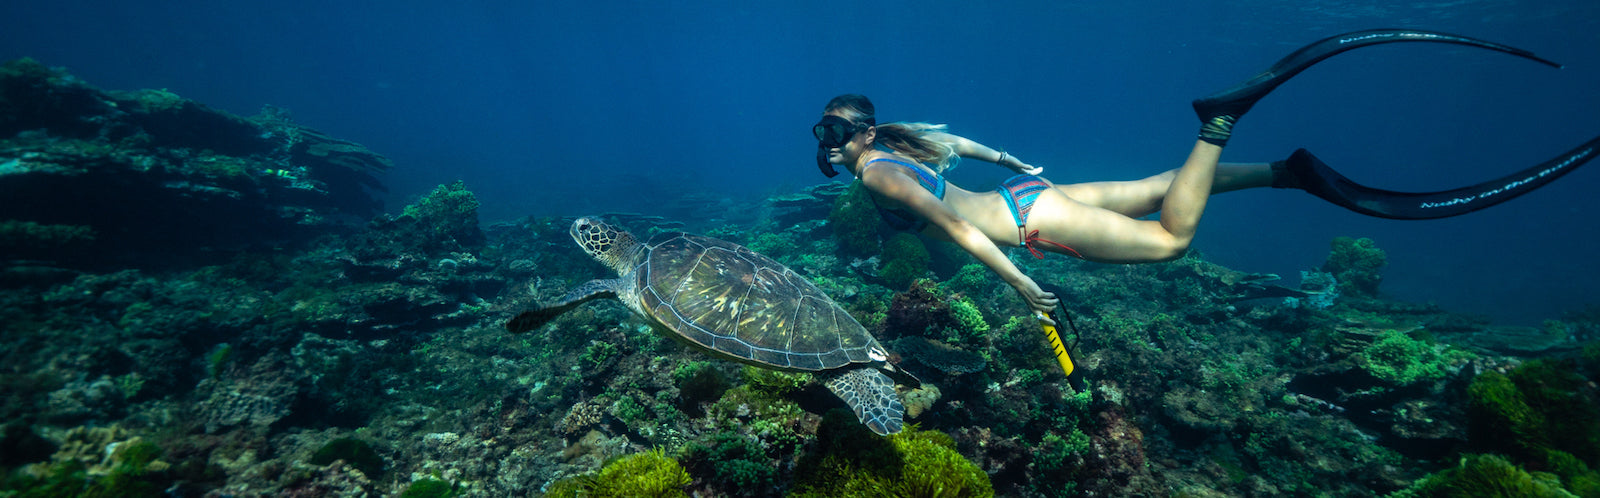 Ocean Guardian USA - Get the world's most effective shark deterrents - Woman snorkelling with Turtles